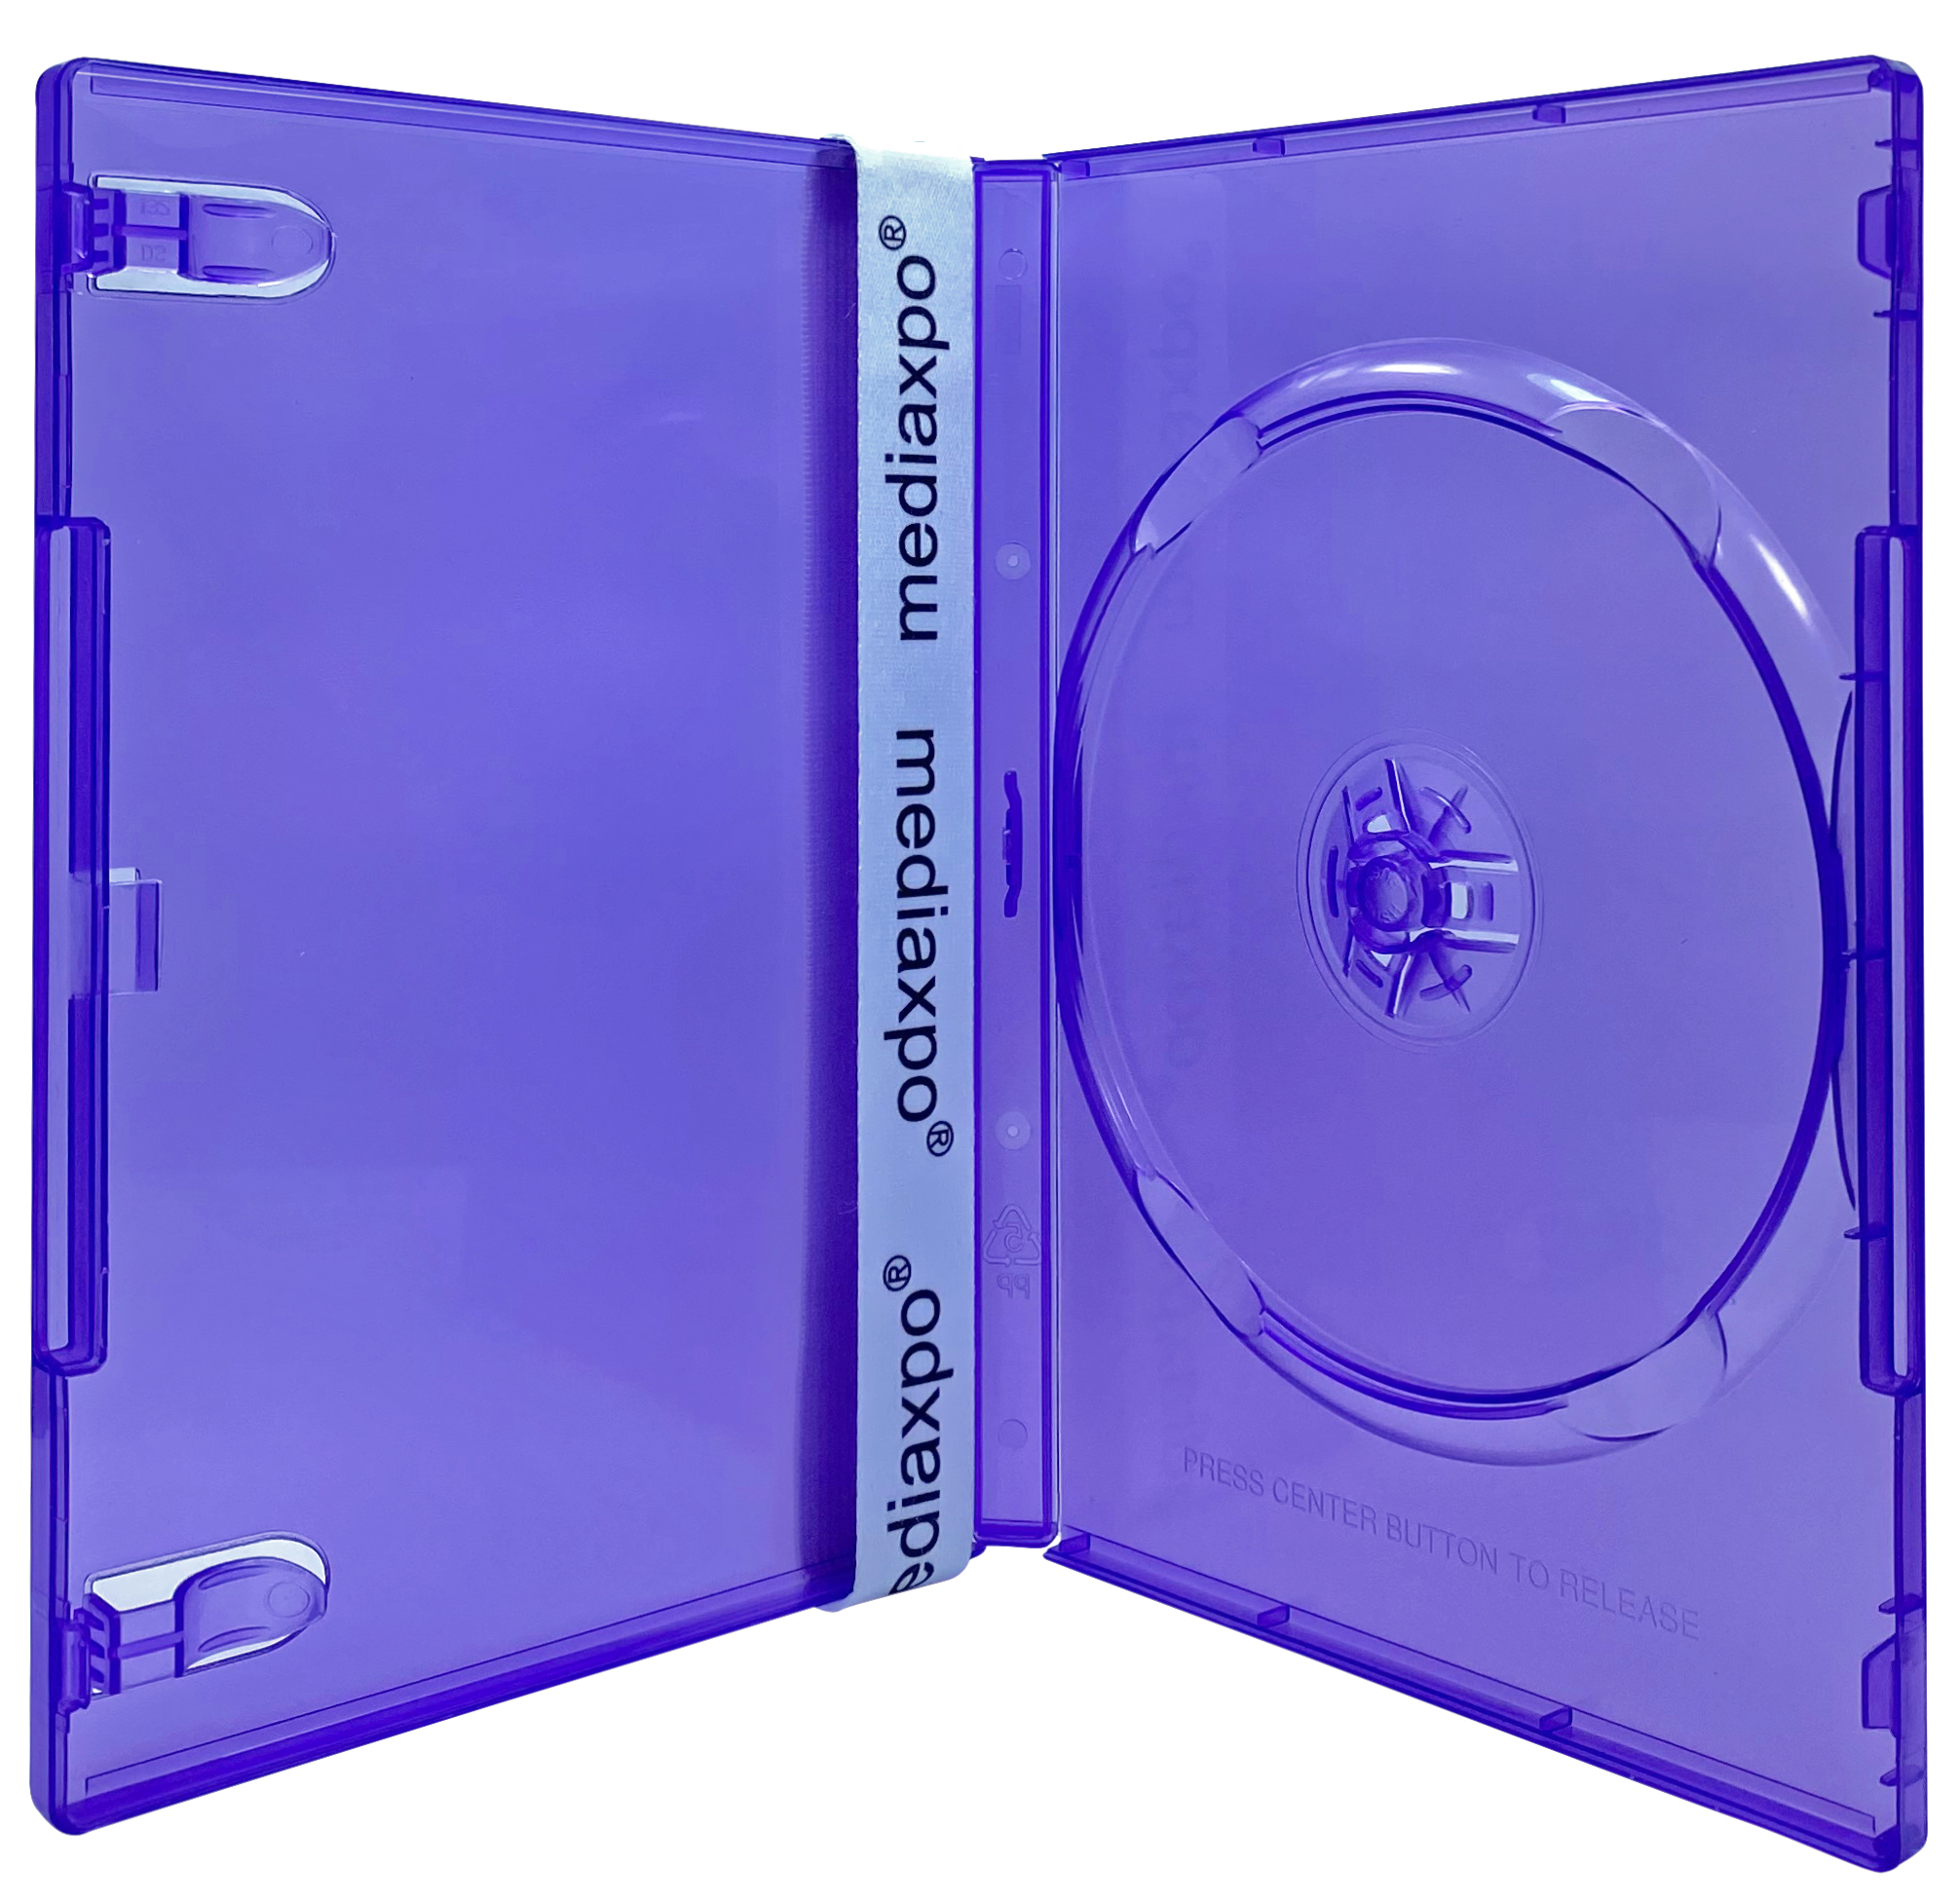 Image of ID 1214260163 500 STANDARD Clear Purple Color Single DVD Cases